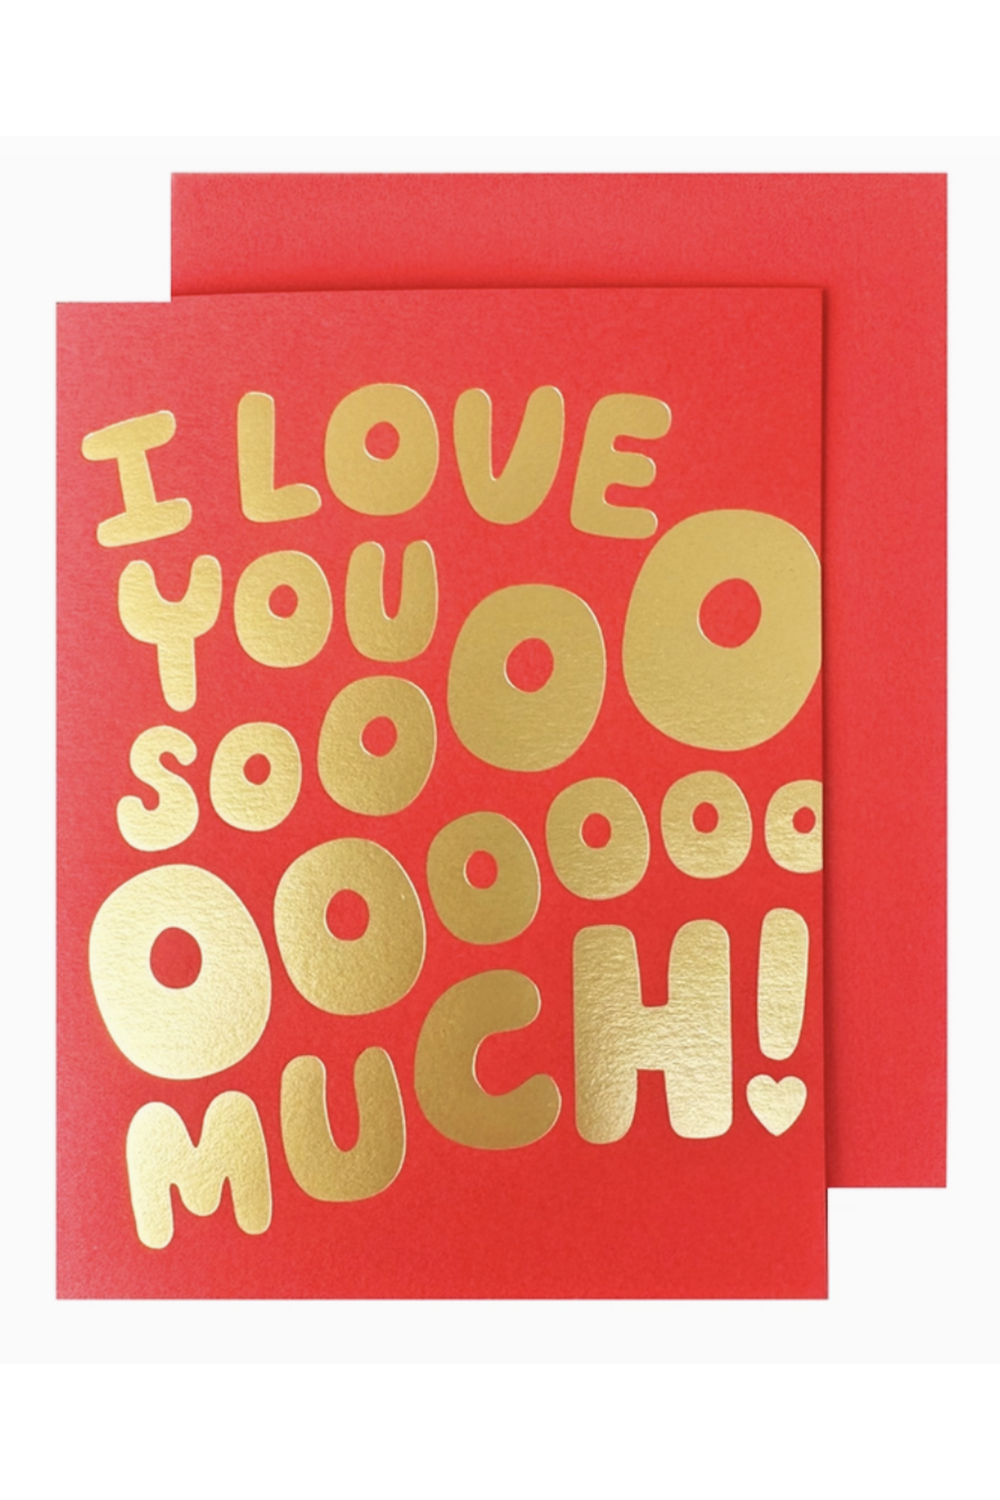 Social Valentine's Day Greeting Card - I Love You SOOO Much!